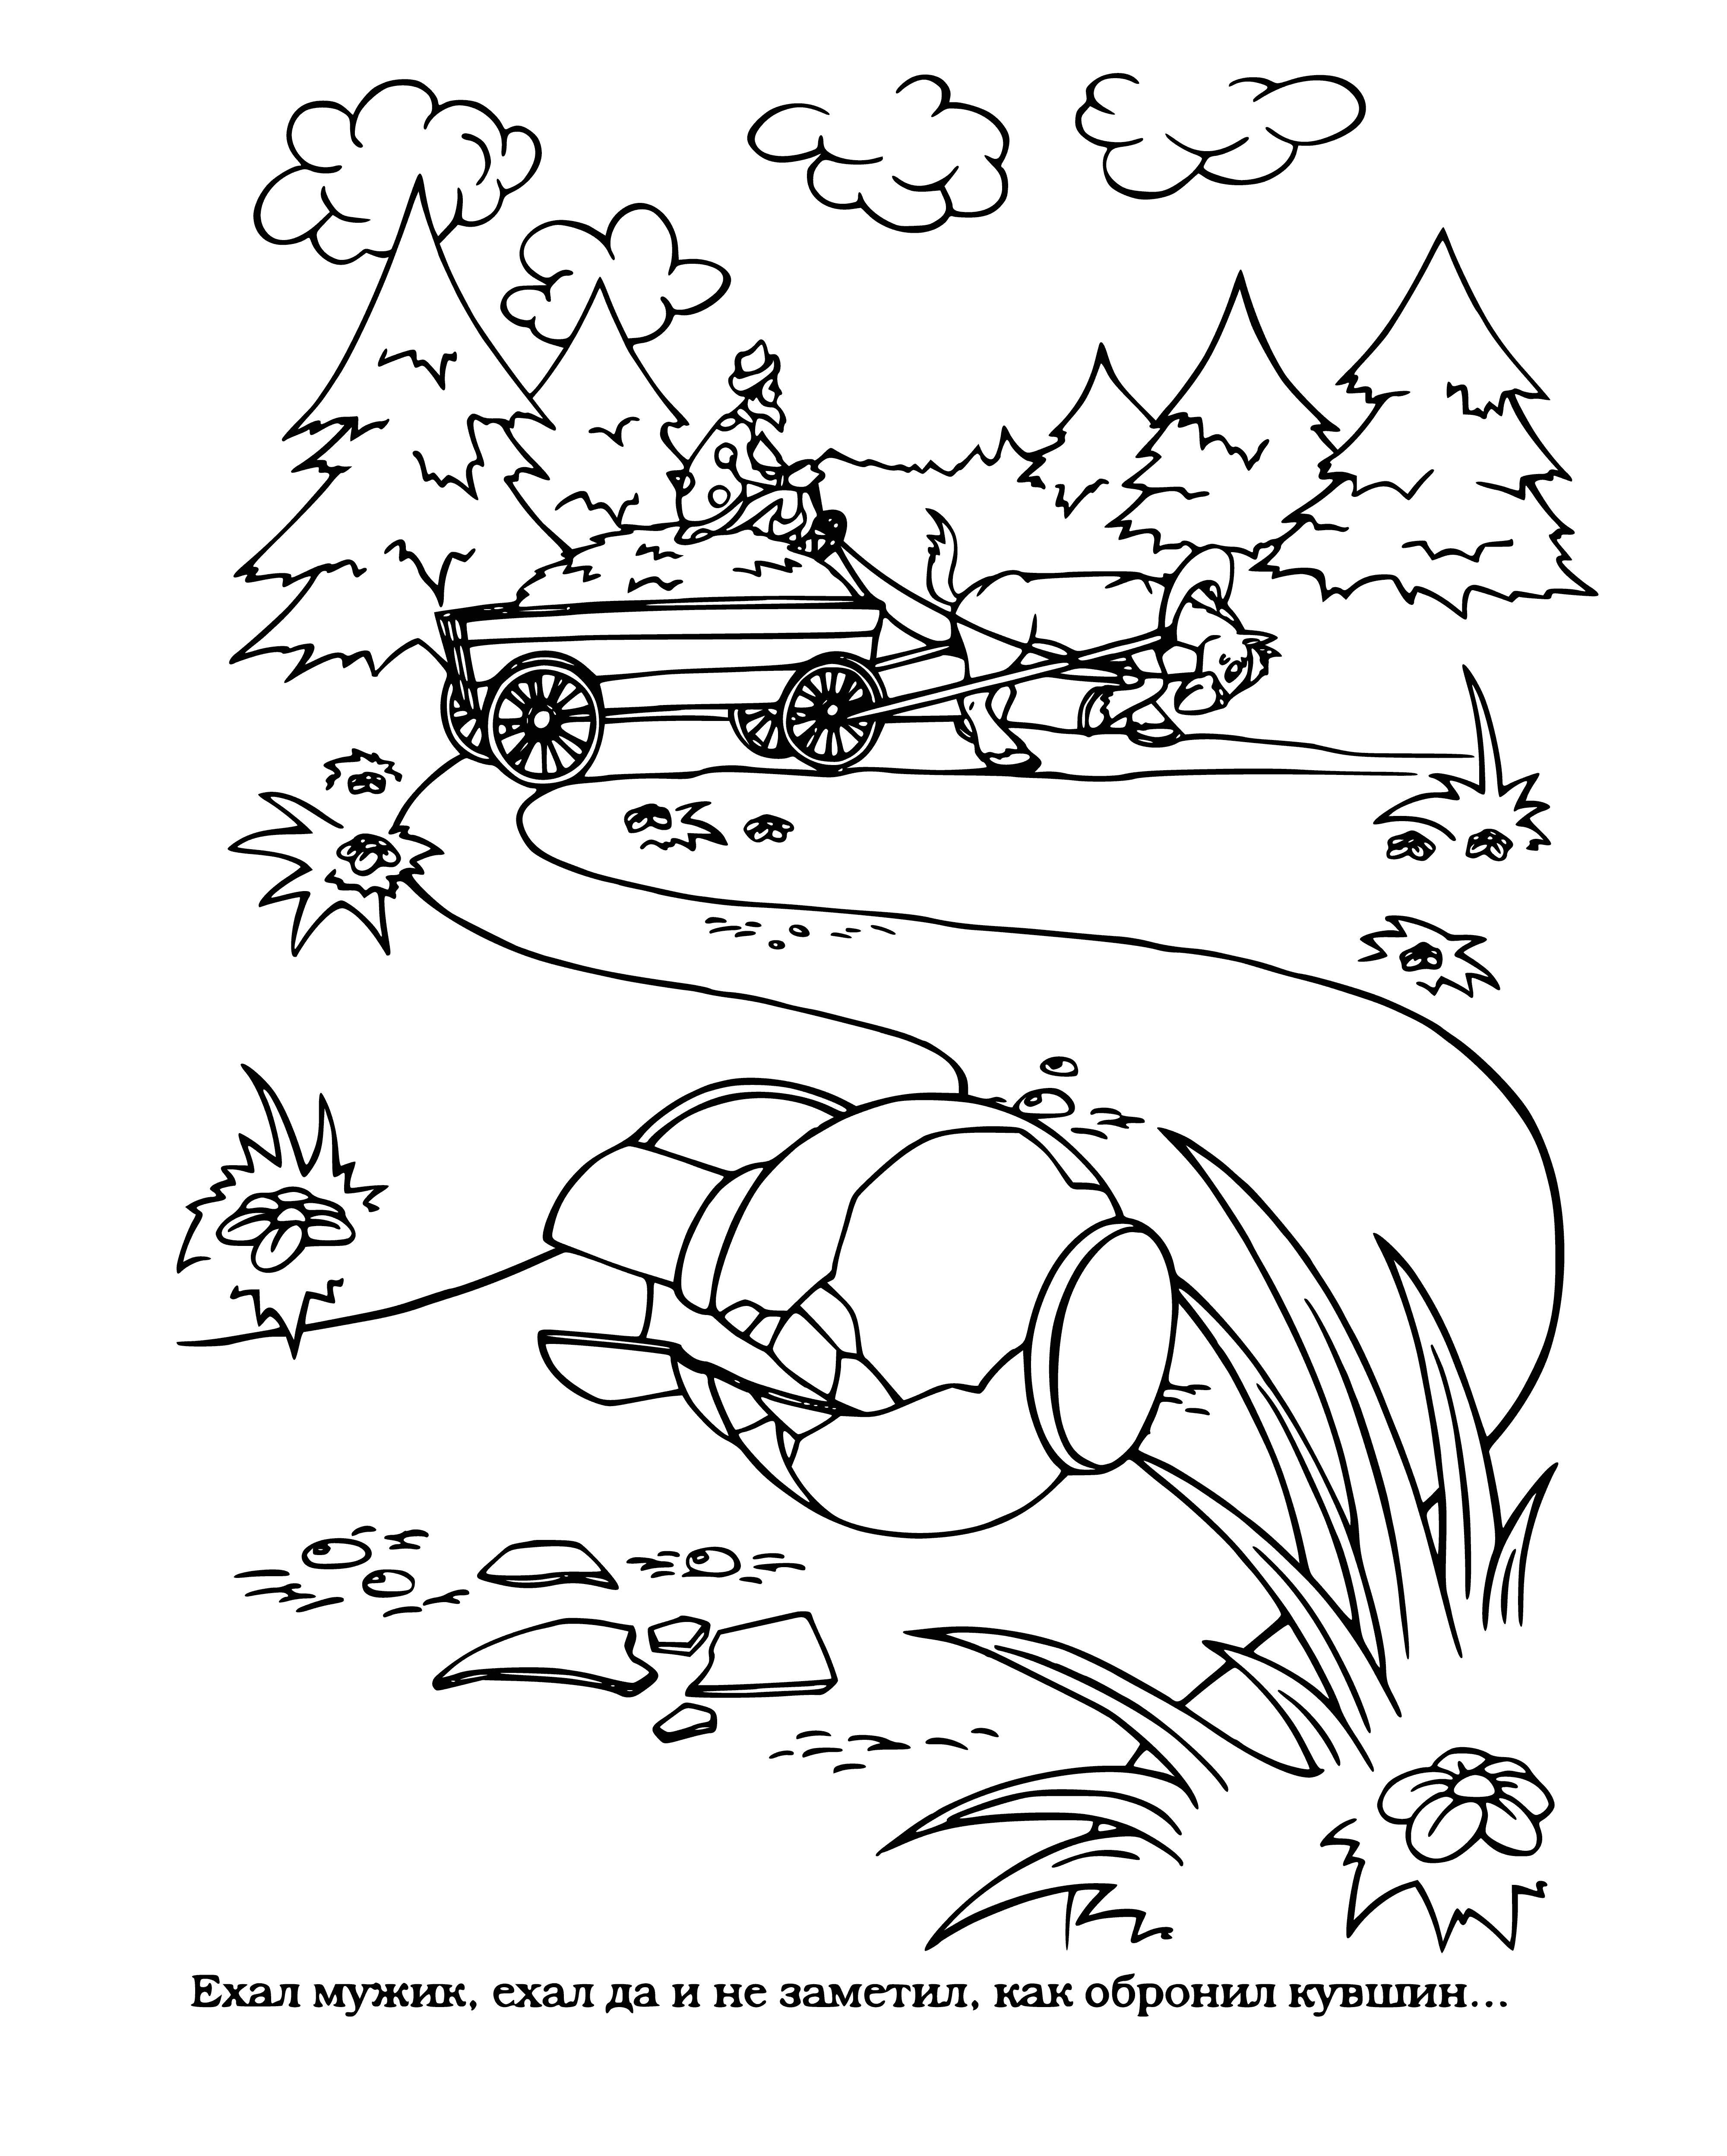 coloring page: Russian man drops large pitcher, worries as he looks at broken pieces. Behind him beautiful Russian landscape w/hills & river.